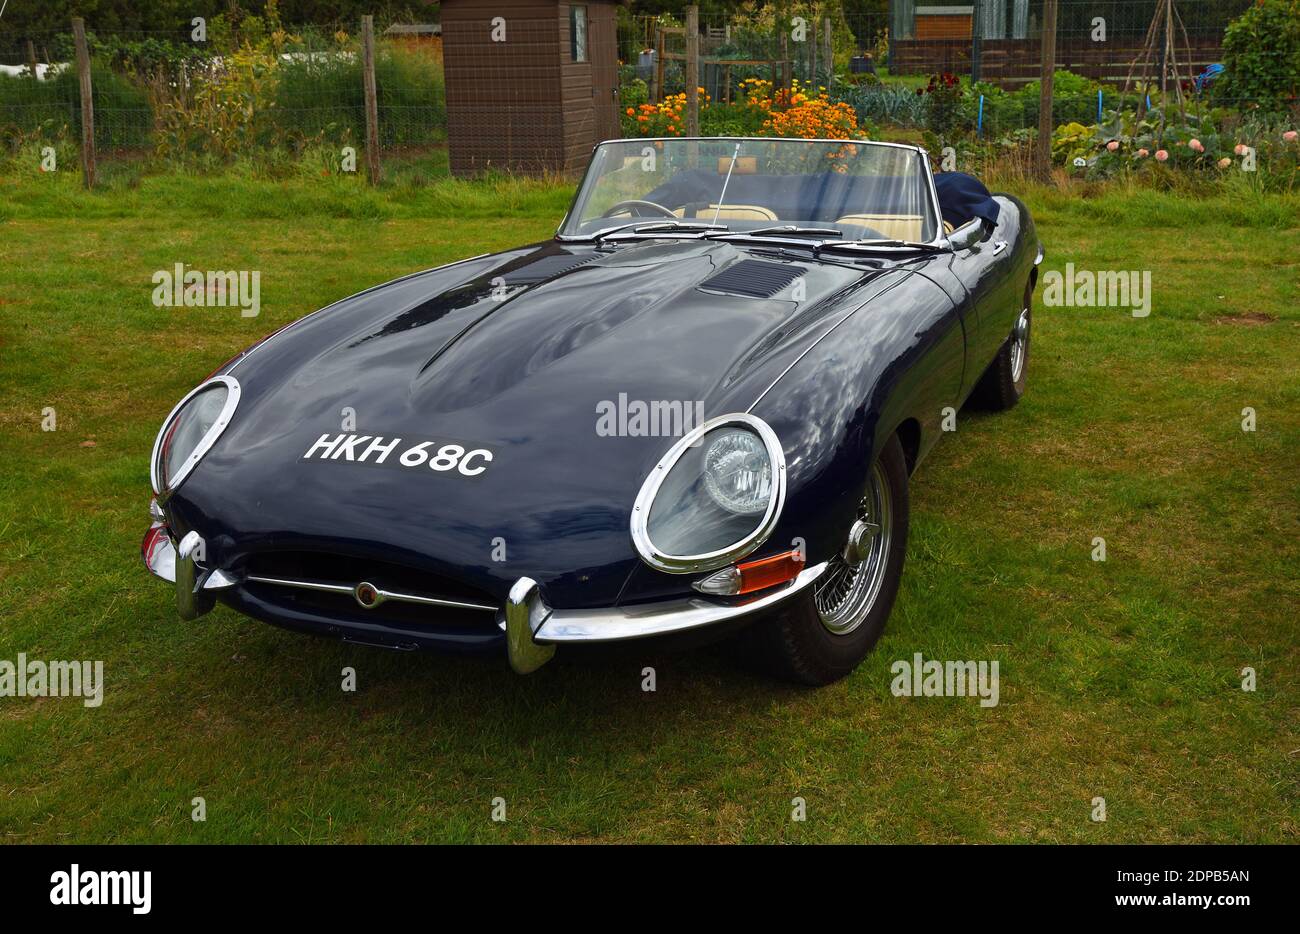 Classic Dark Blue 1965 Jaguar E Type Convertible  isolated parked on grass. Stock Photo